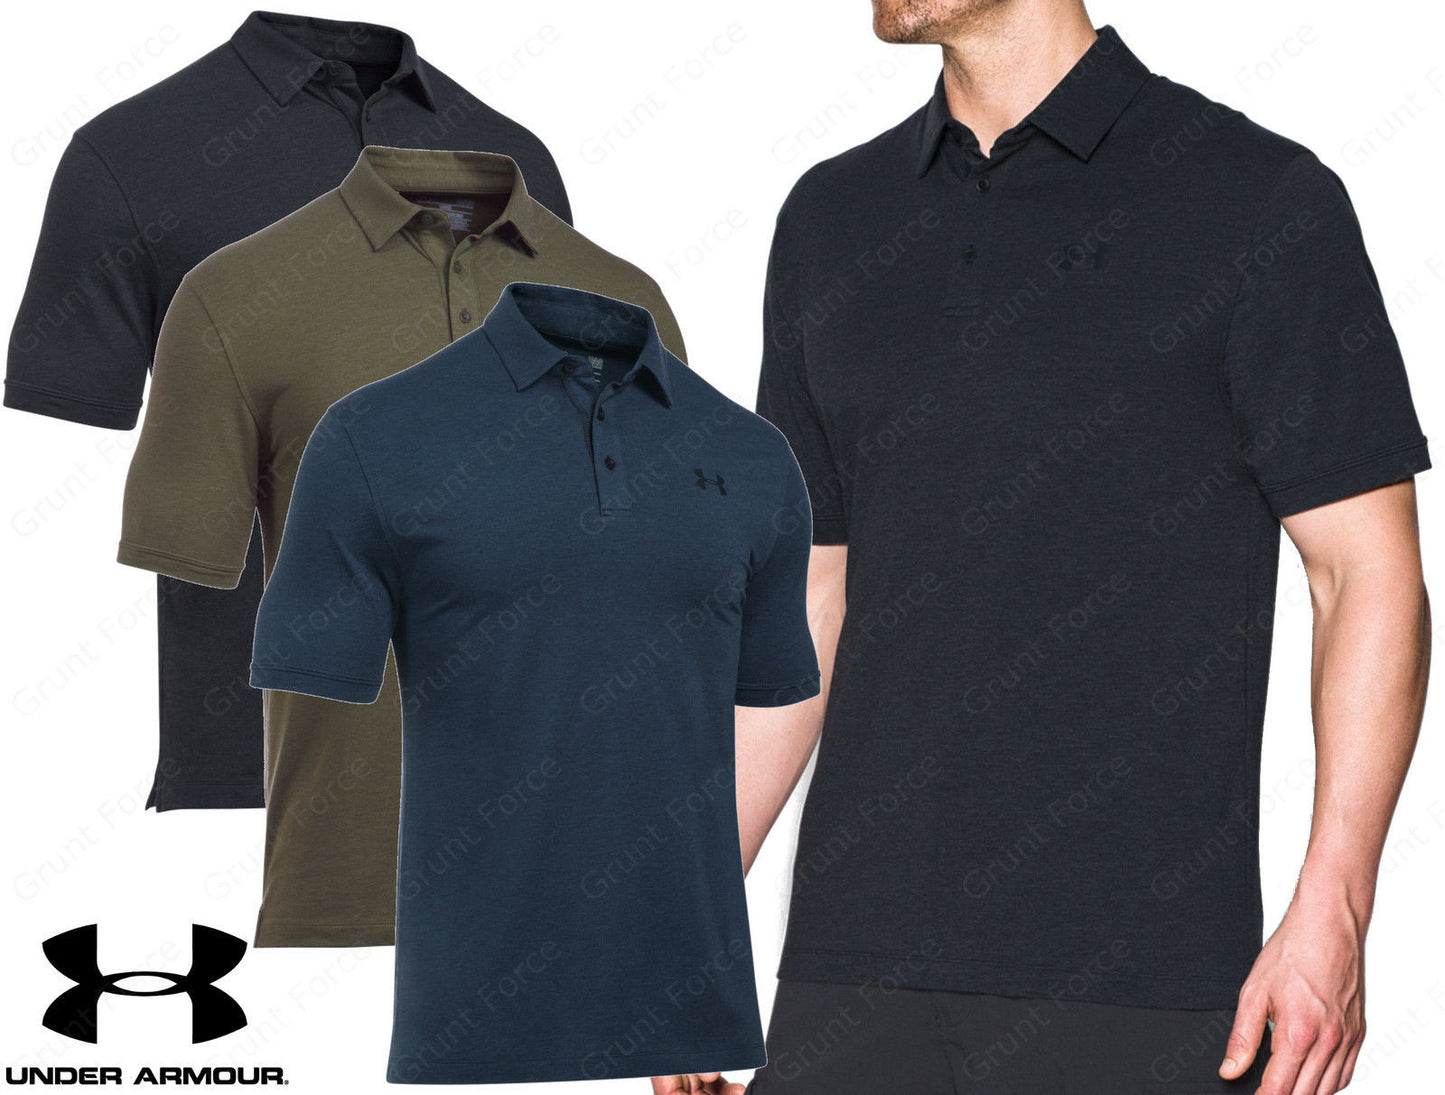 Under Armour Tactical Charged Cotton - UA Men's Tactical Polo Shirt